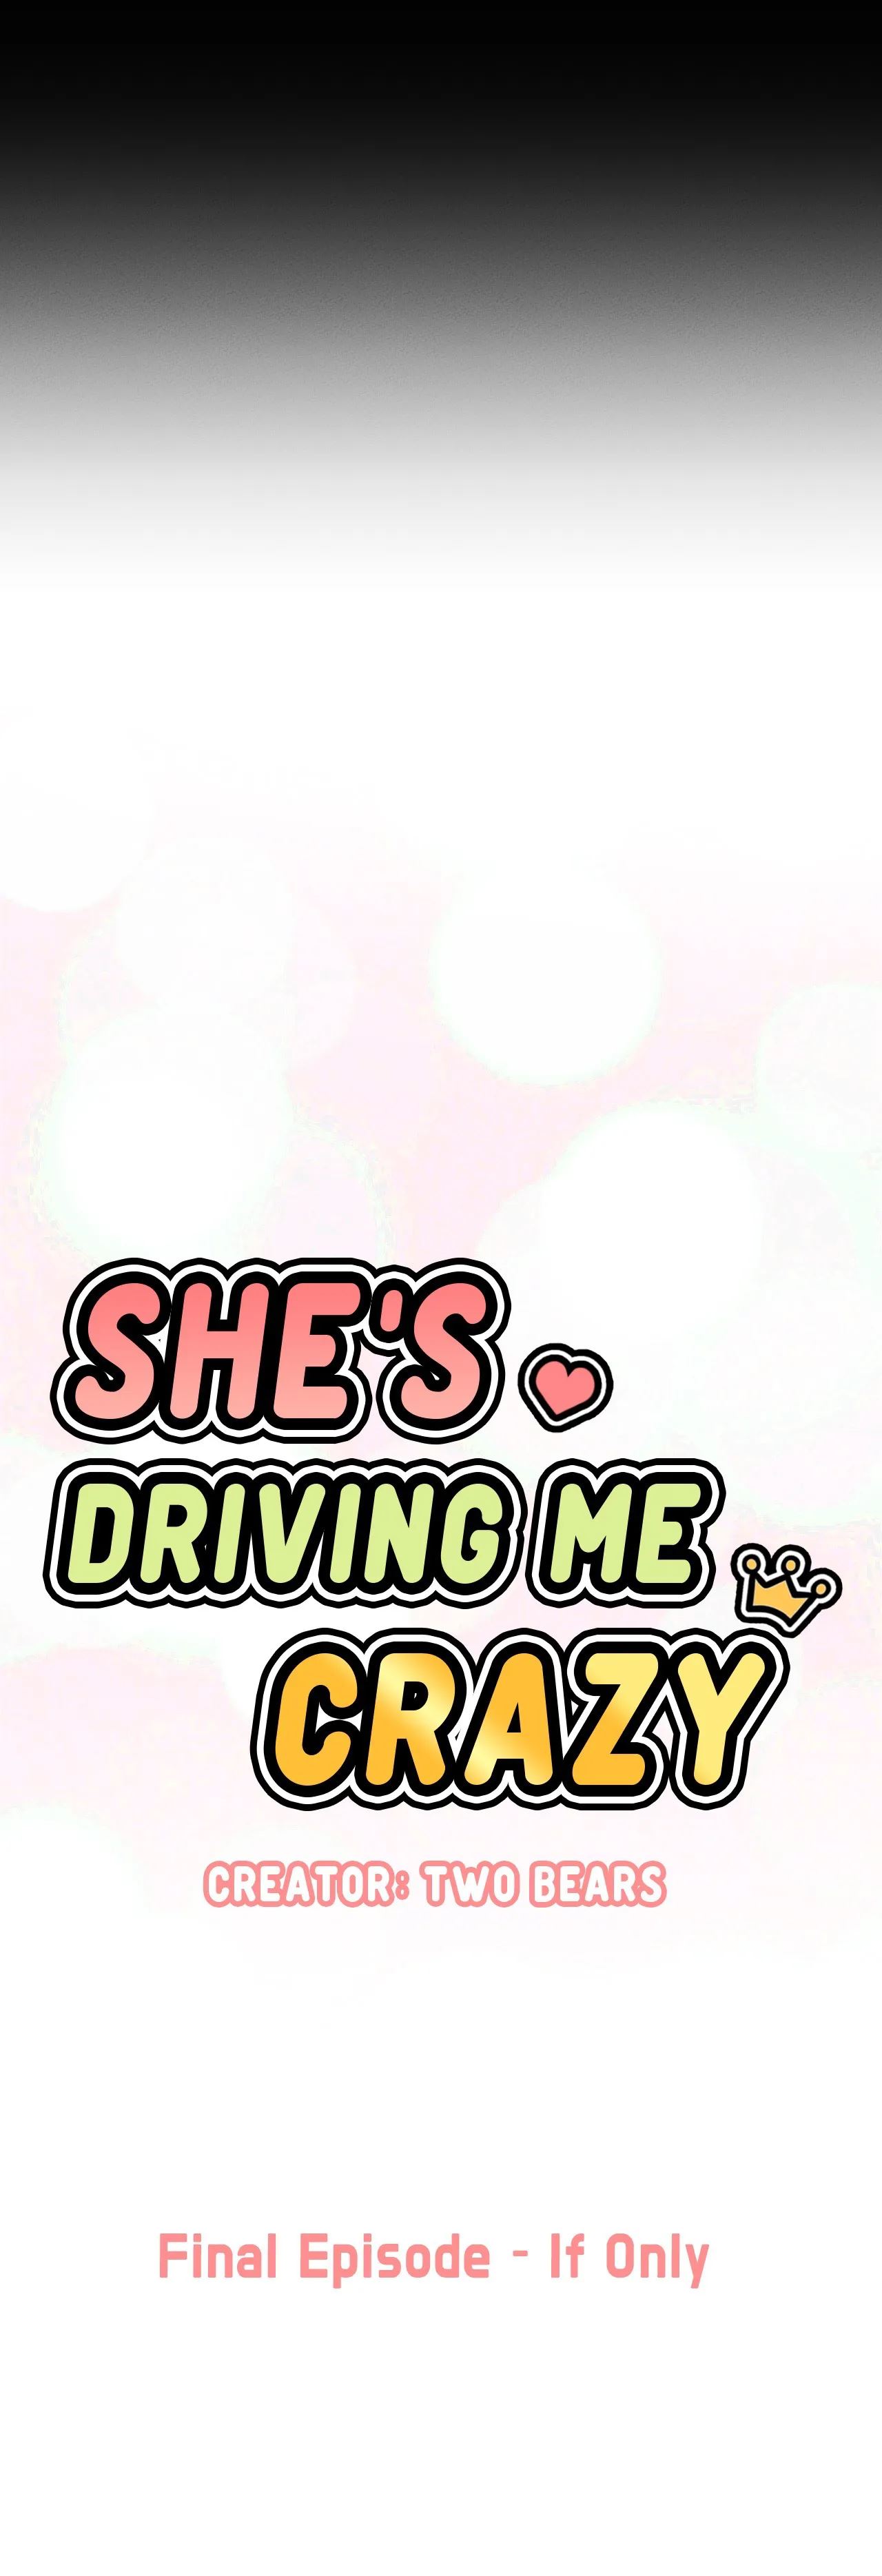 She’s Driving Me Crazy NEW image